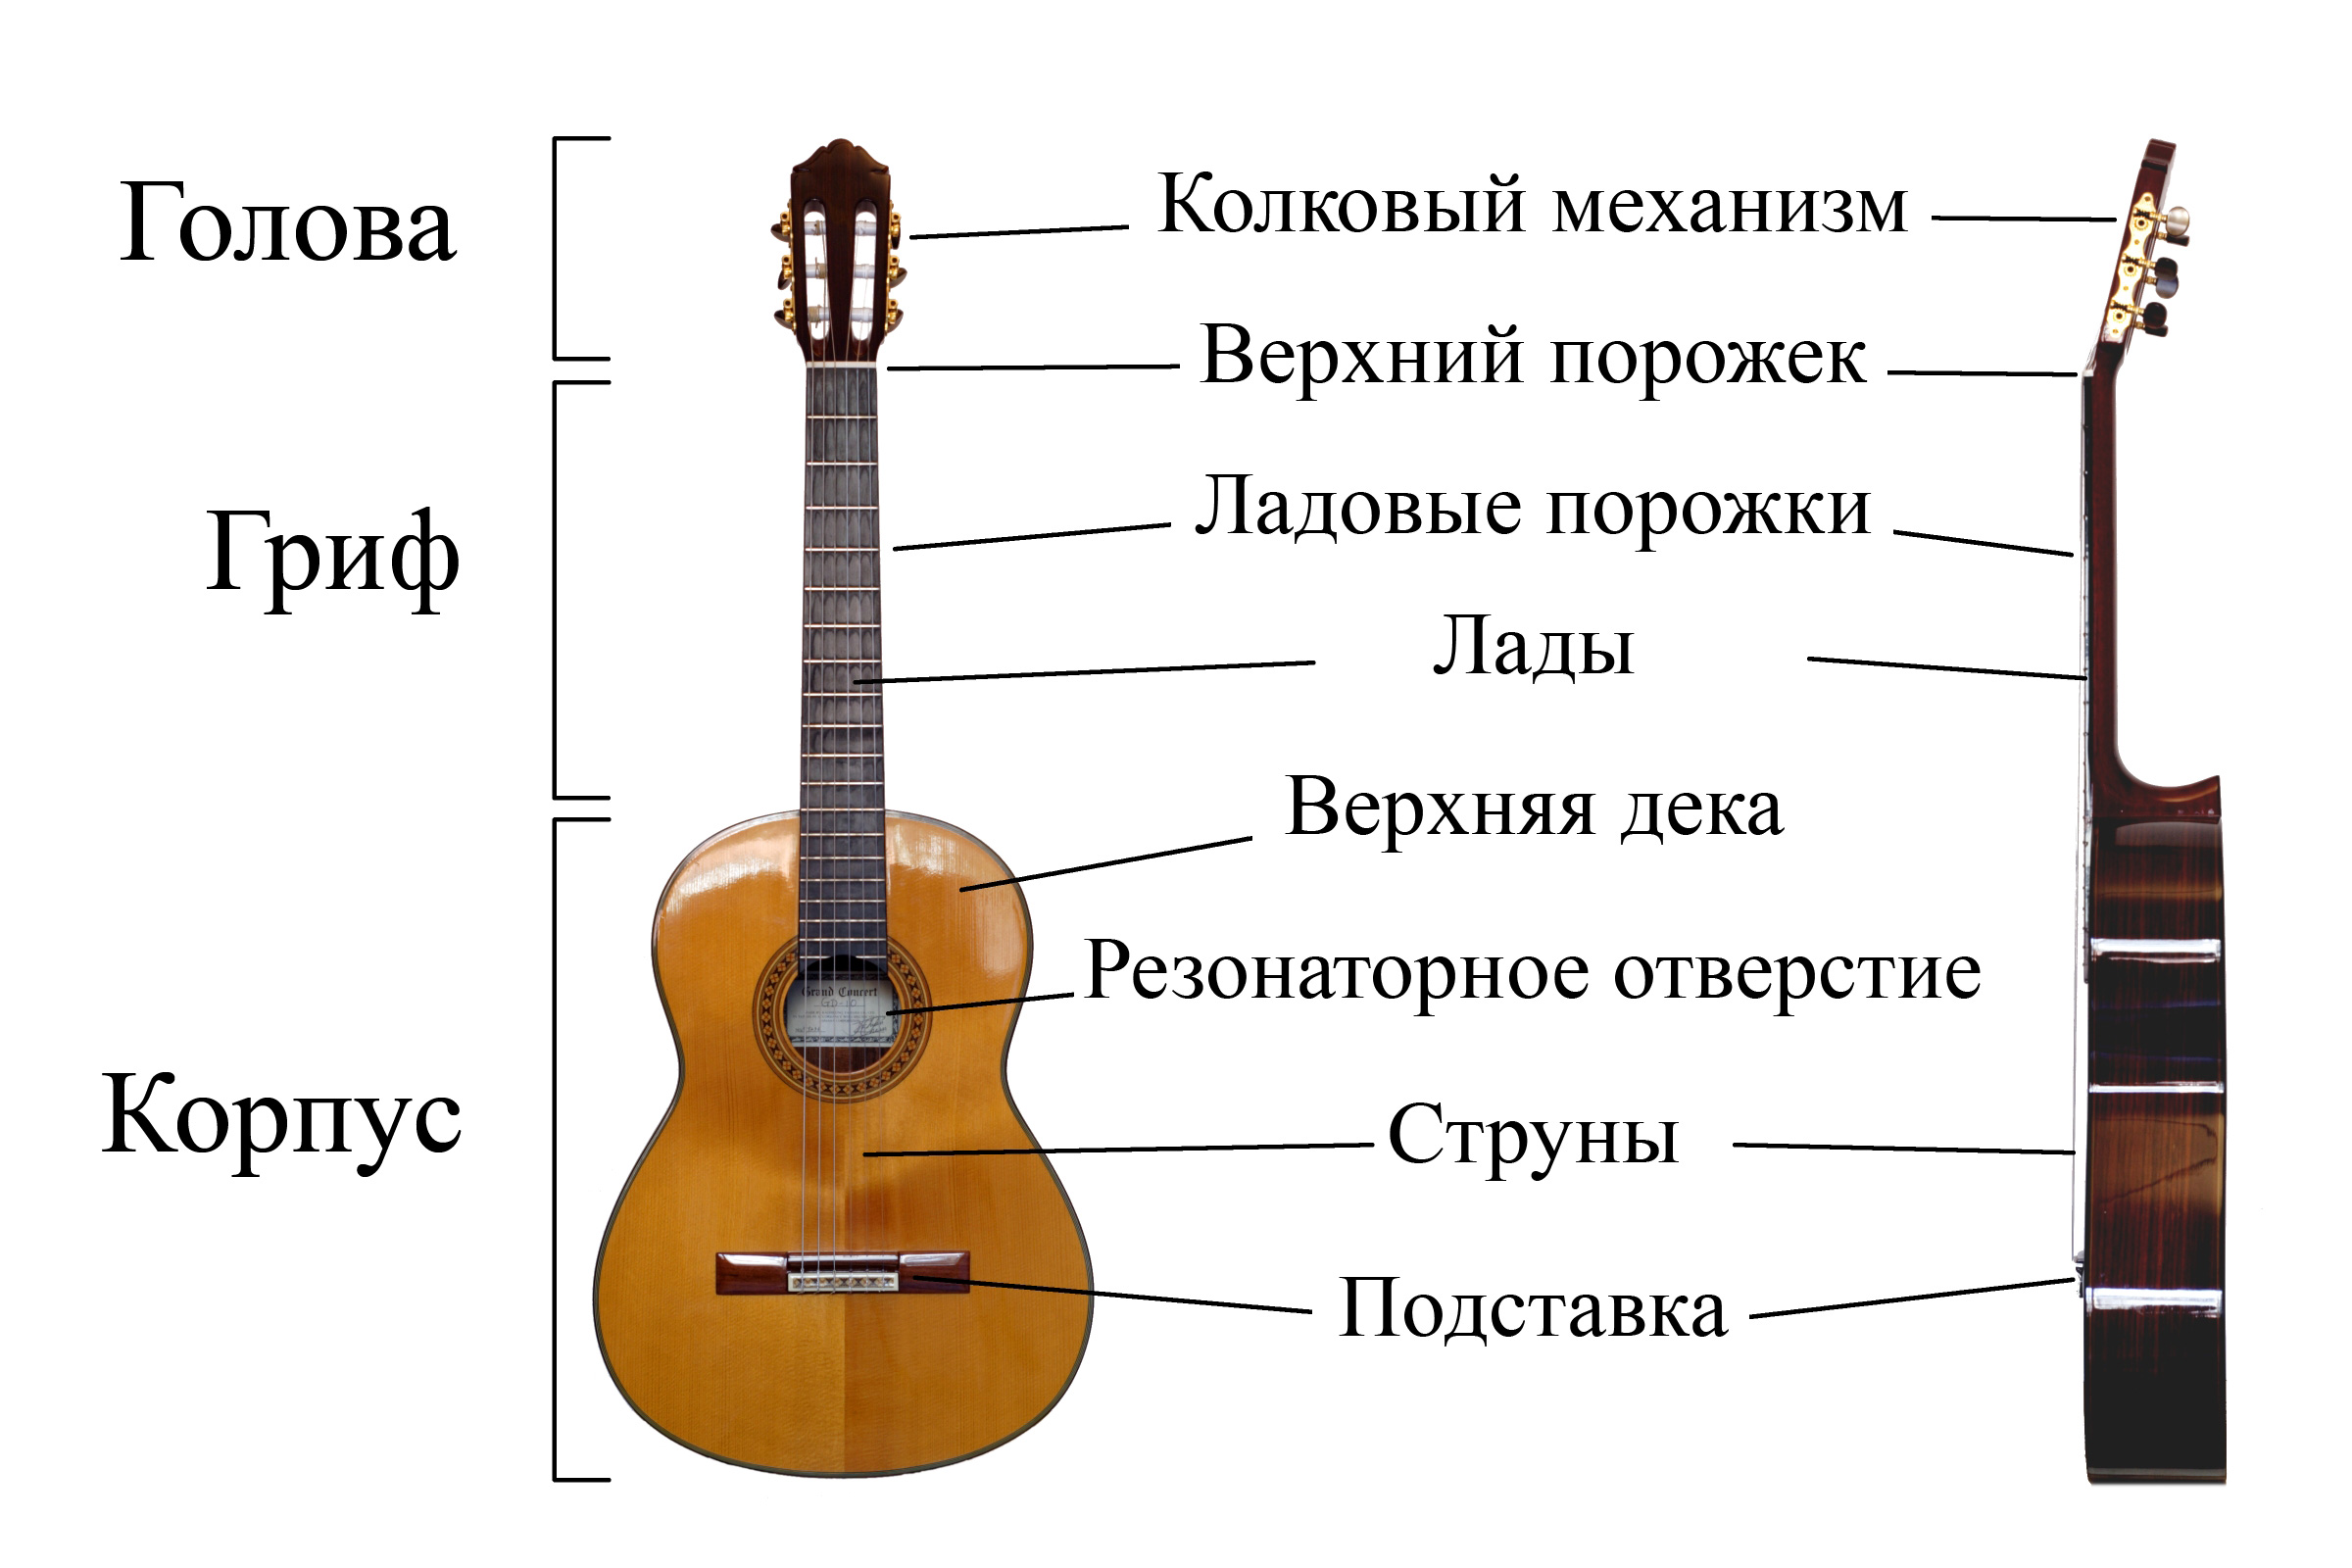 https://upload.wikimedia.org/wikipedia/commons/f/fd/Classical_Guitar_labelled_russian.jpg